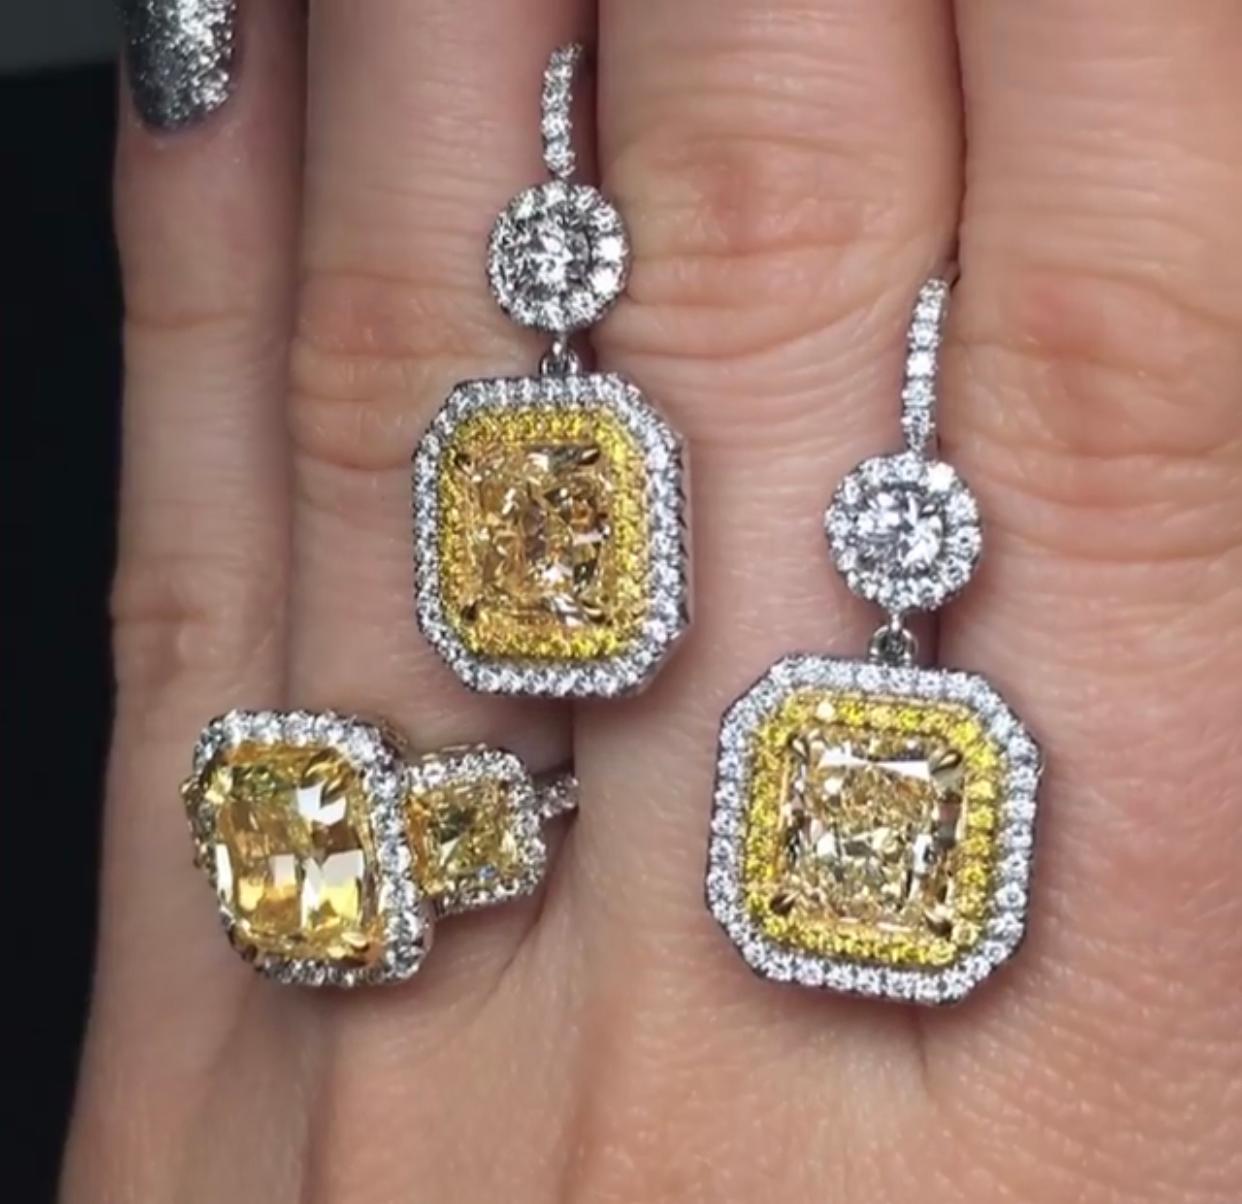 18K White Gold Double halo yellow diamond earrings. Two yellow diamonds are GIA Certified Fancy Light Yellow Diamonds, VS in Clarity, surrounded by 1.75 Carats of round brilliant cut diamonds, F-G in Color VS in Clarity. 
Set in white gold custom